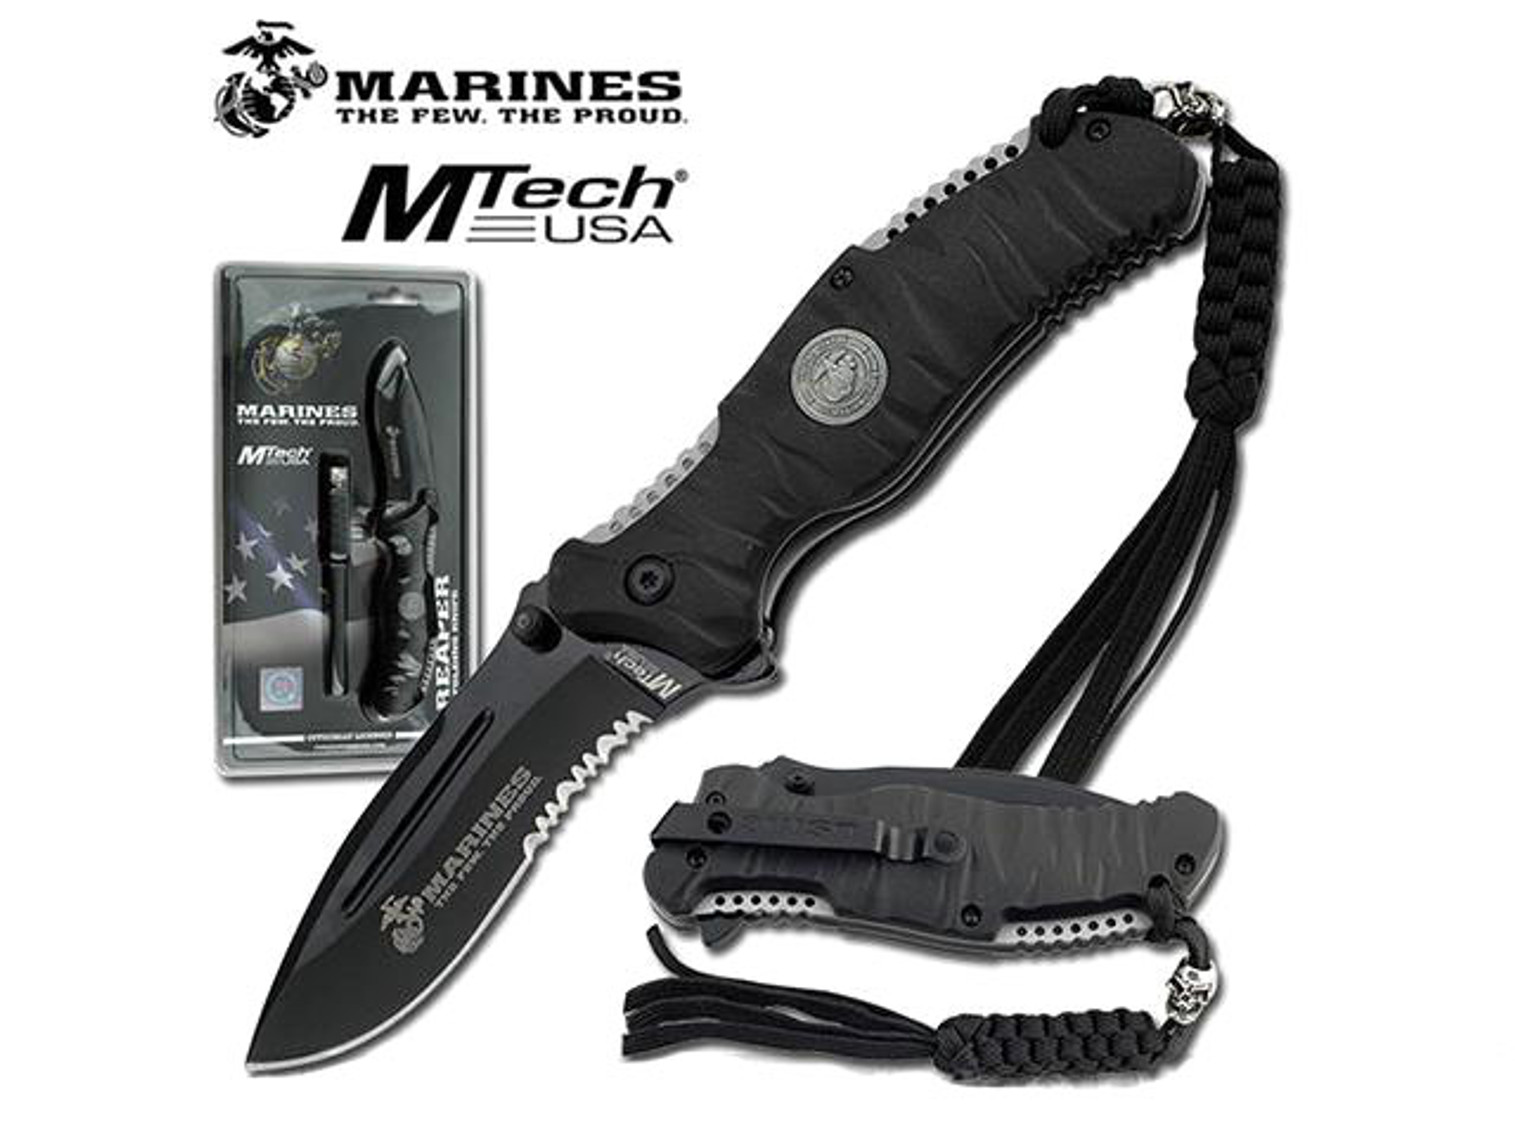 USMC Marine Reaper Assisted Opening Folding Knife with 3 5/8" Blade - Black